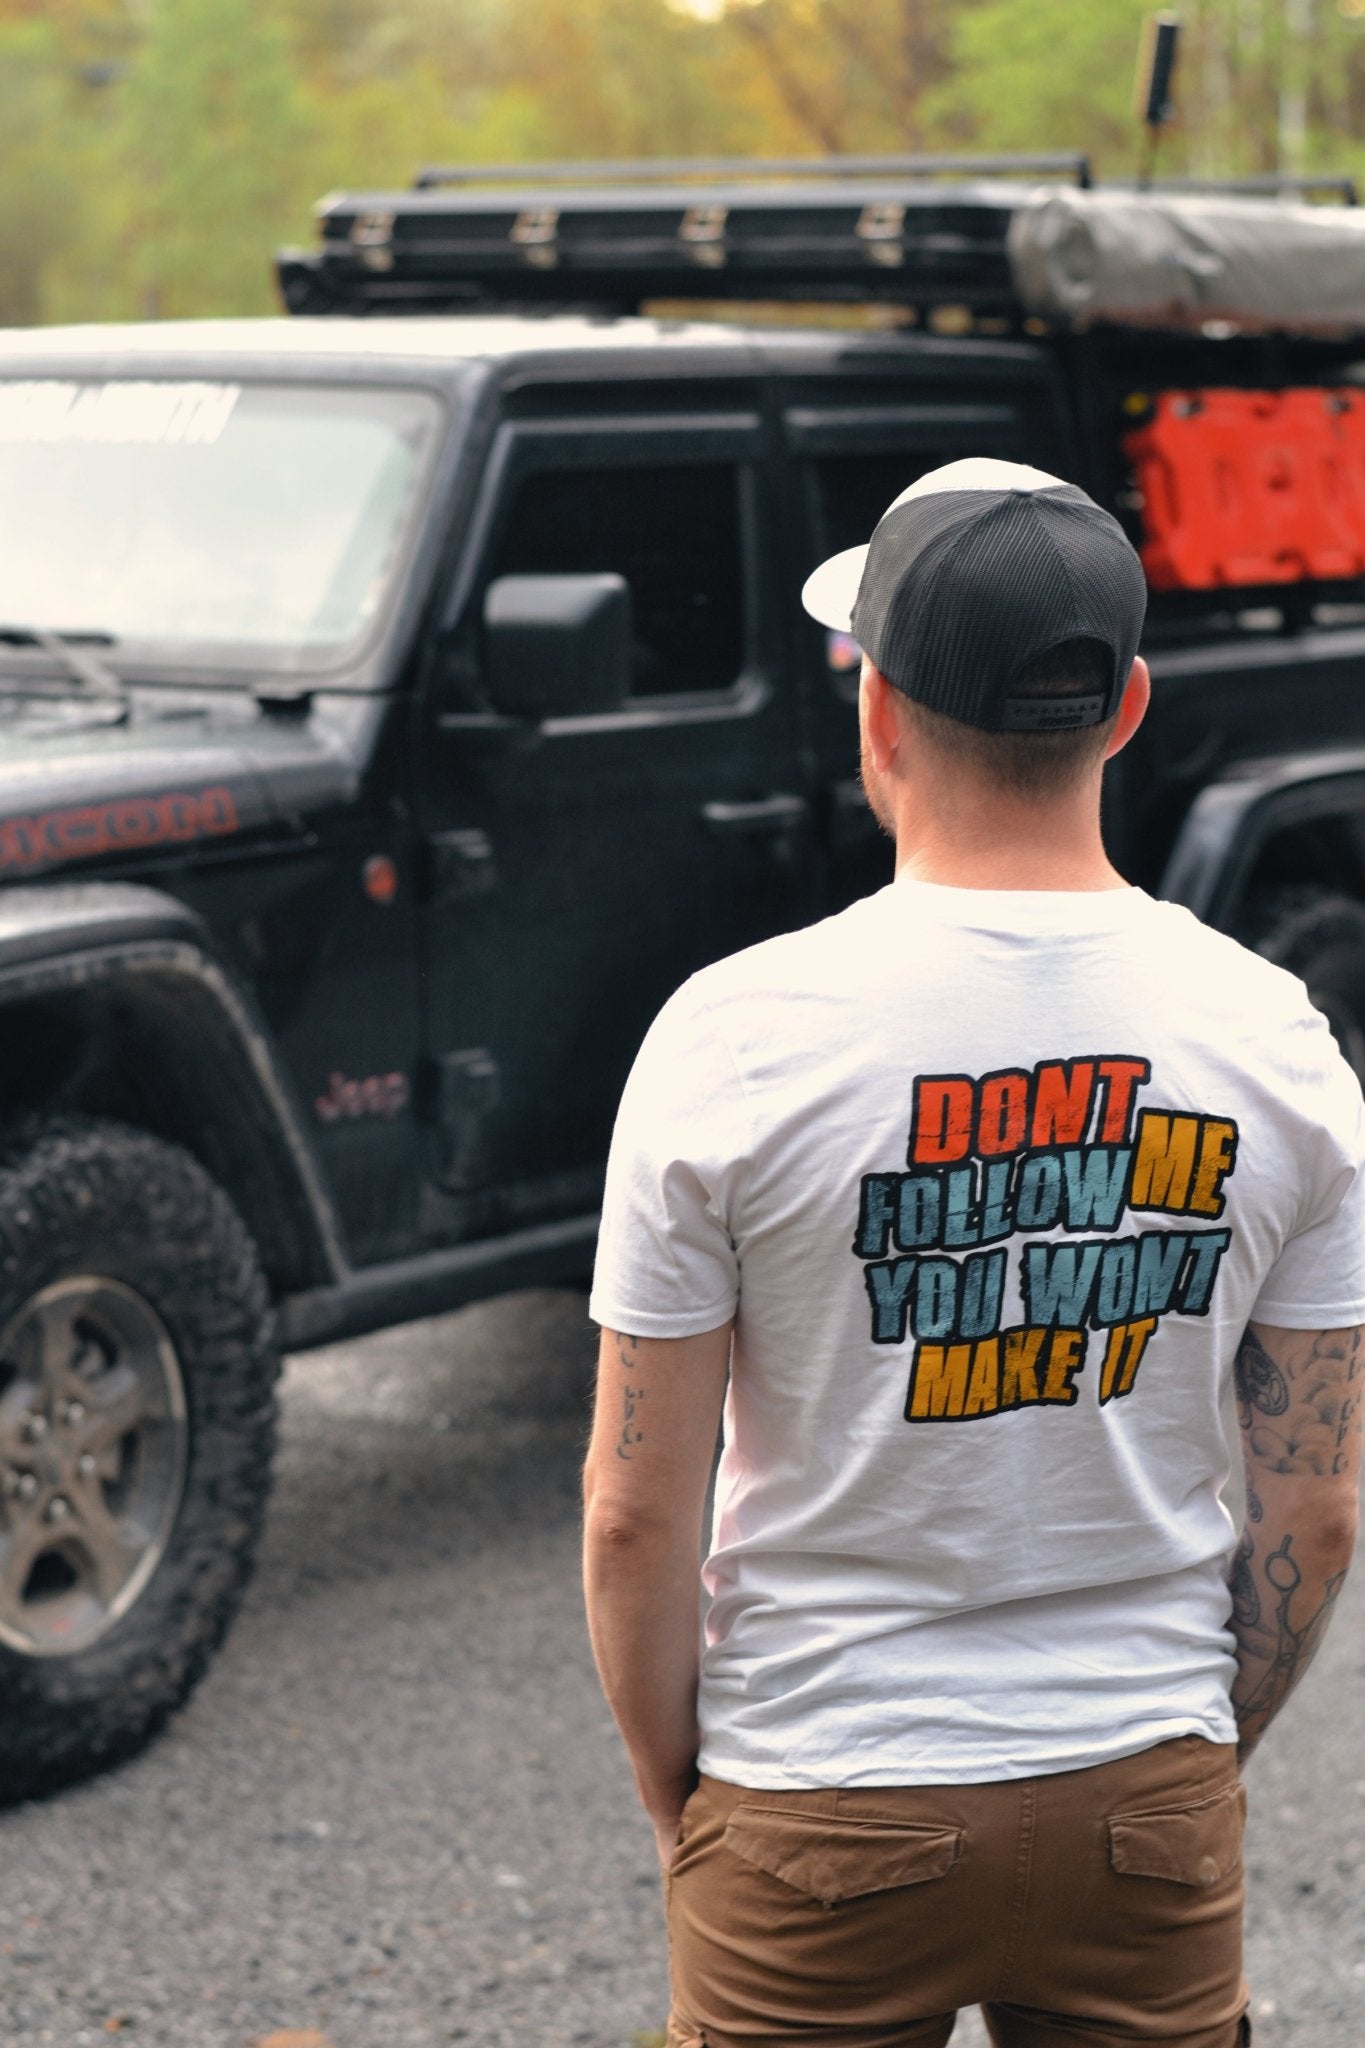 Don't Follow Me You Want Make It Graphic Tee Shirt - Goats Trail Off-Road Apparel Company